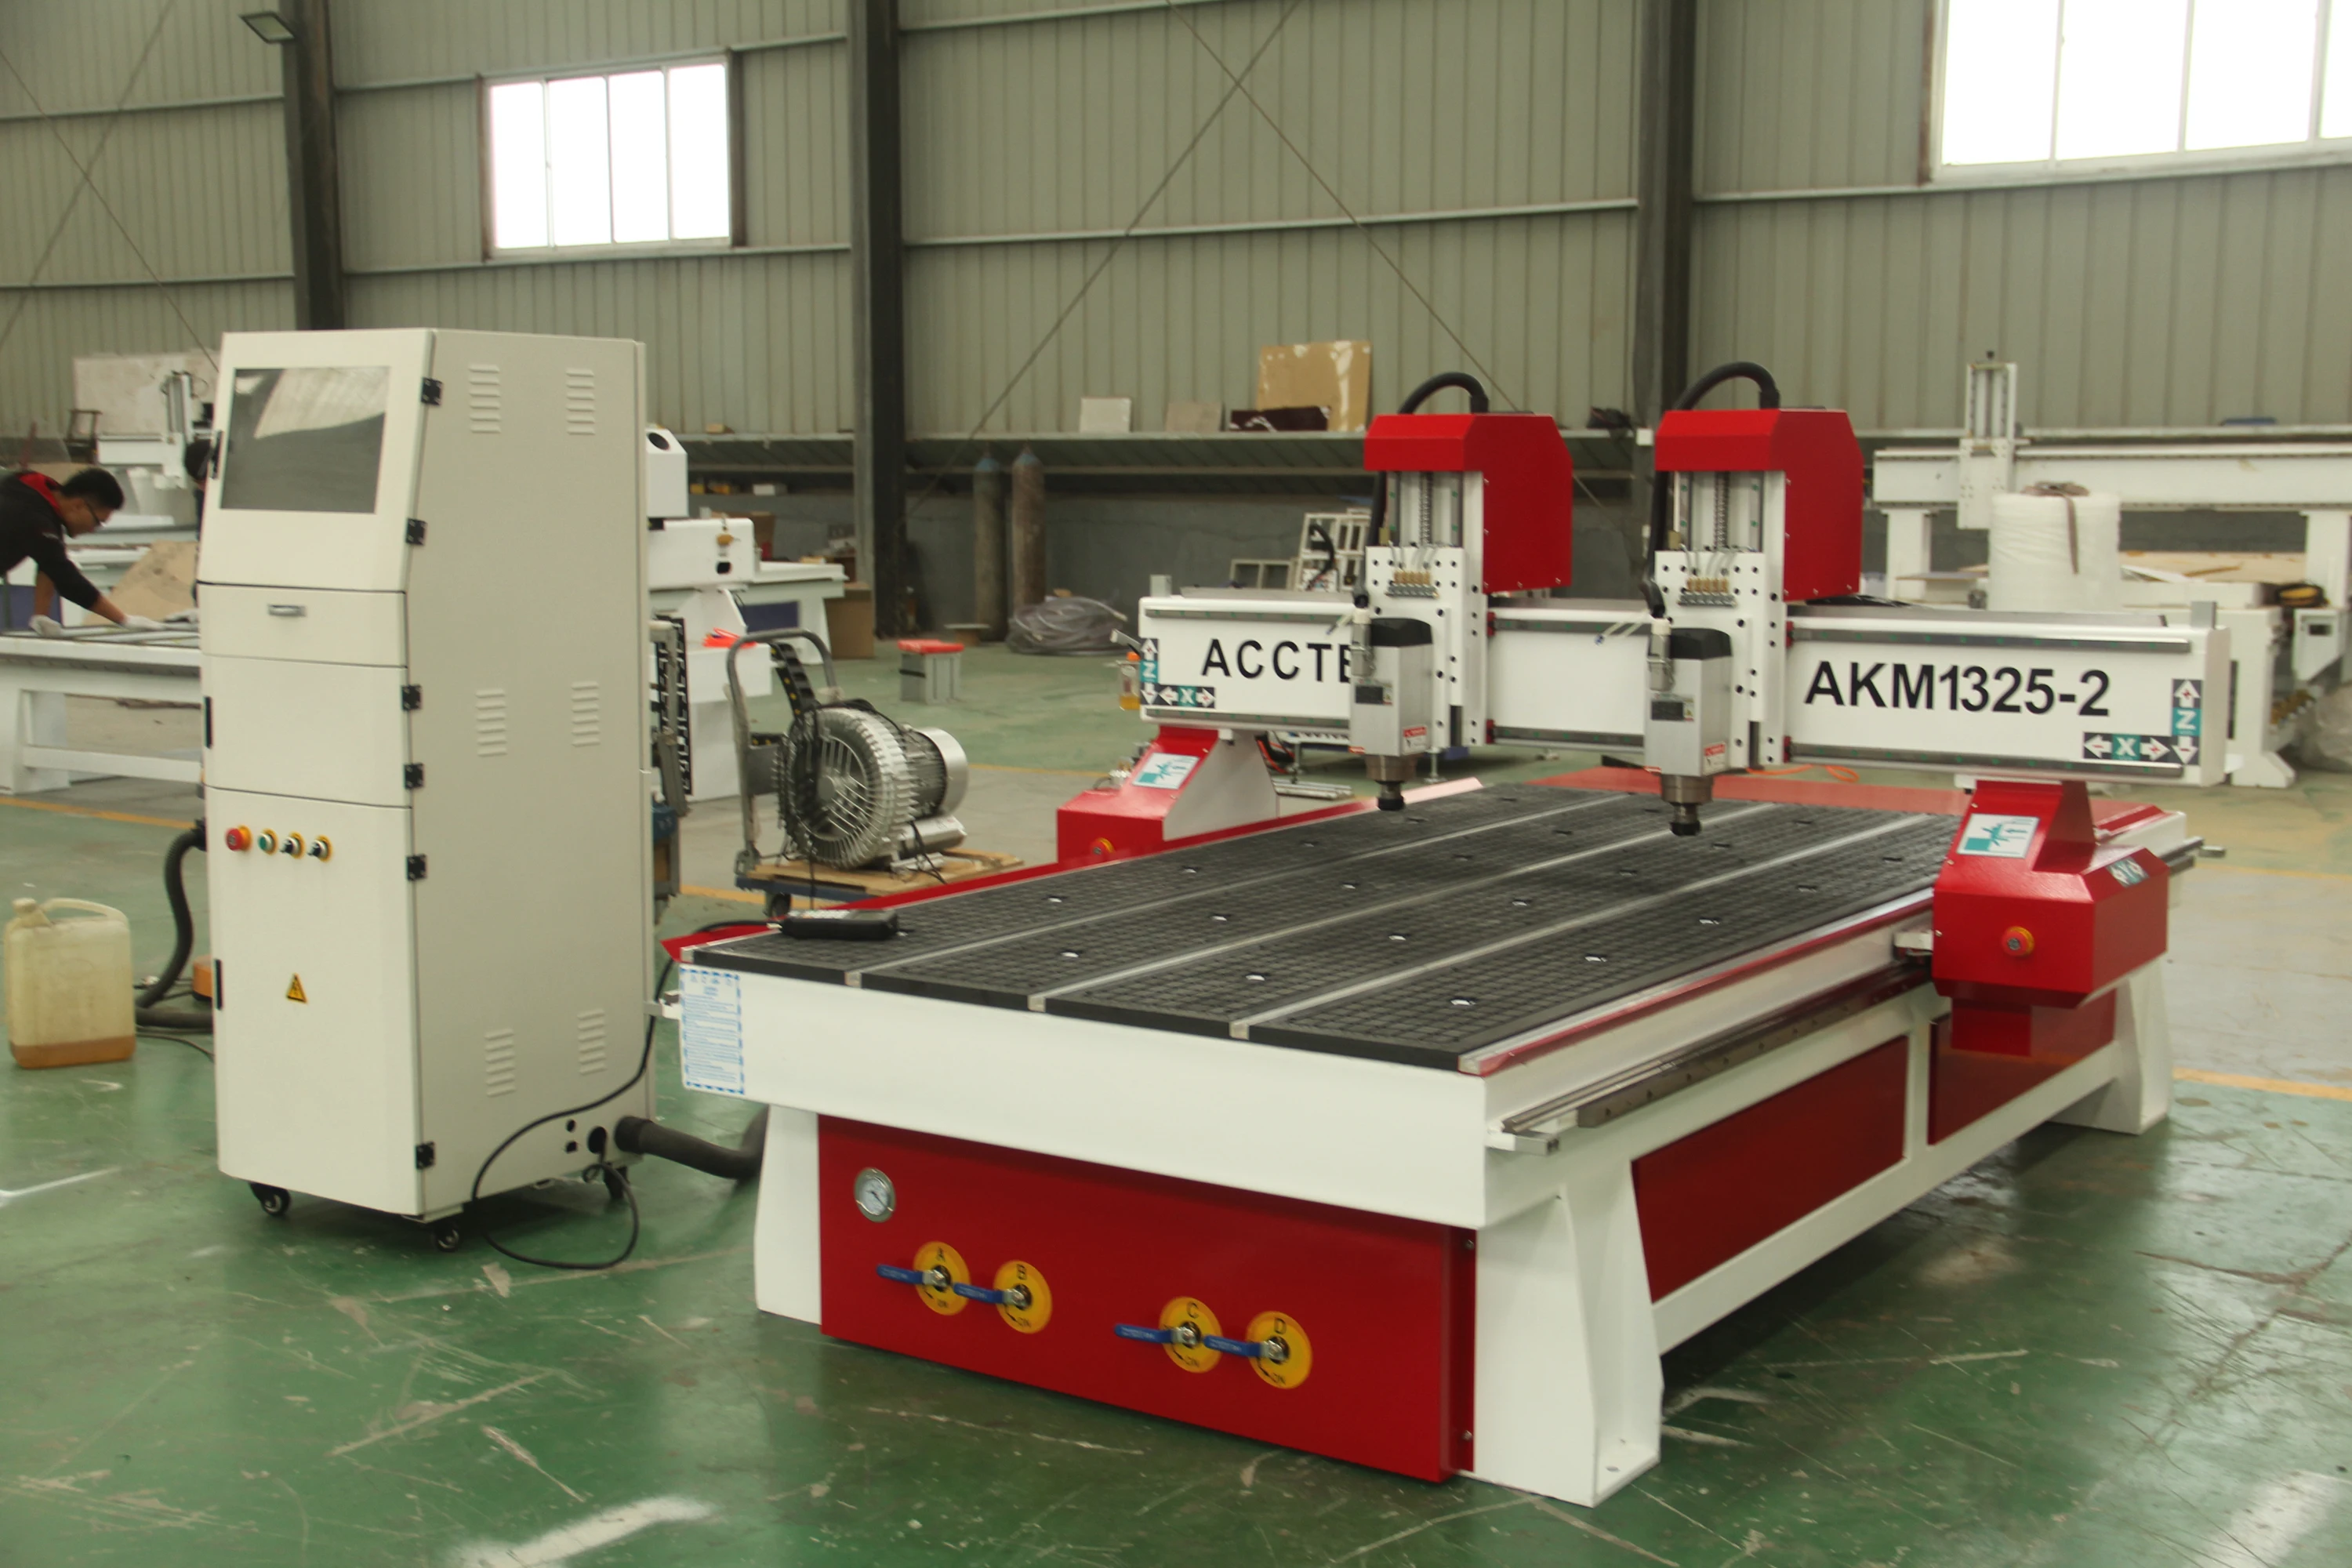 

Wood Milling, CNC Routers, Multi-heads, Two Heads, Cylindrical Project, Wood Carving Machine, Chipboard Plywood MDF, Tools